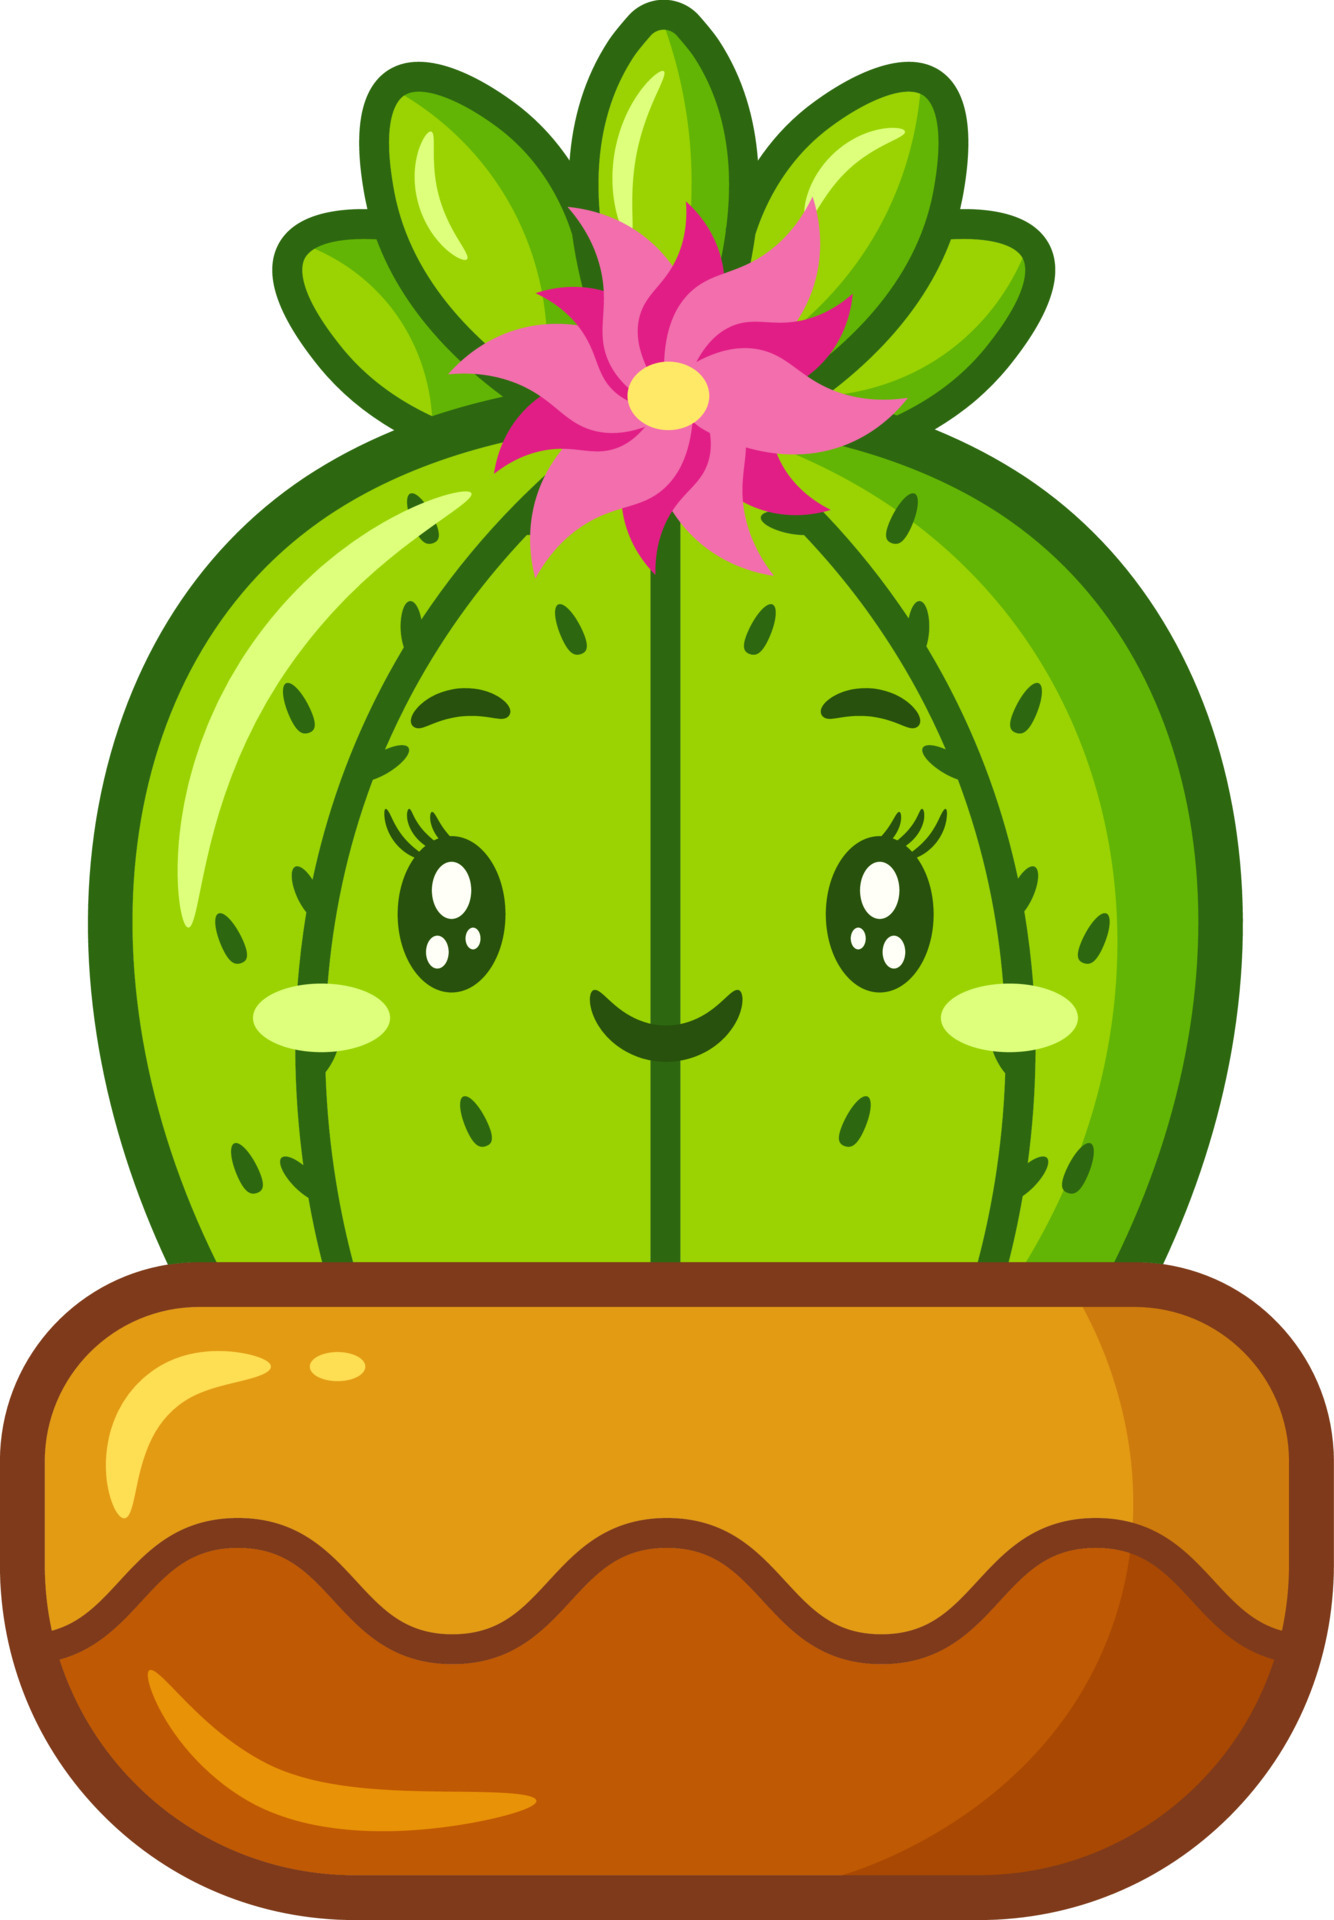 Cactus cute sticker drawing sketch for coloring 5484819 Vector Art